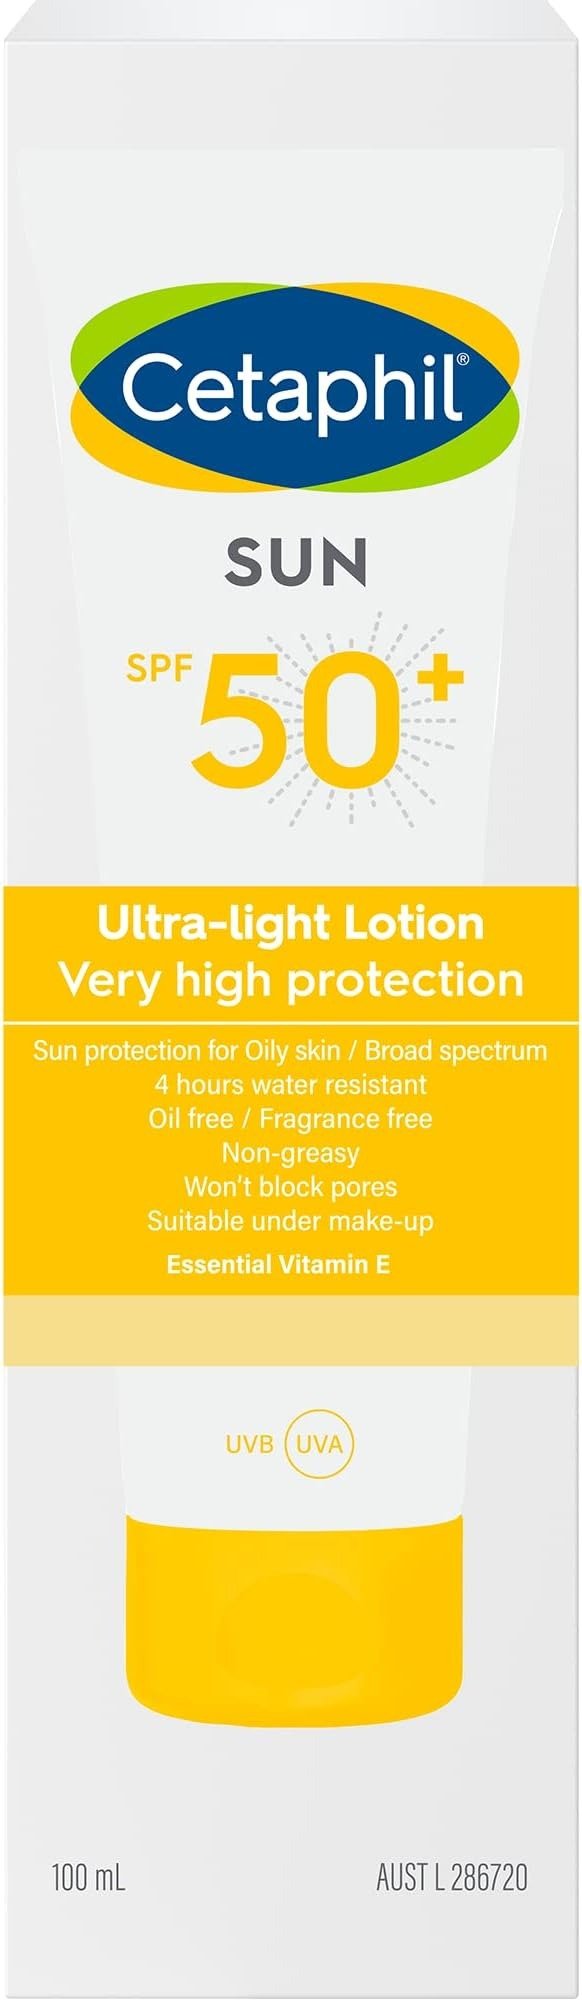 Ultra-Light Lotion SPF 50+ 100mL | Sunscreen | Broad Spectrum Sun Protection For Oily Skin | For oily skin | 4 hours water resistant | Essential Vitamin E